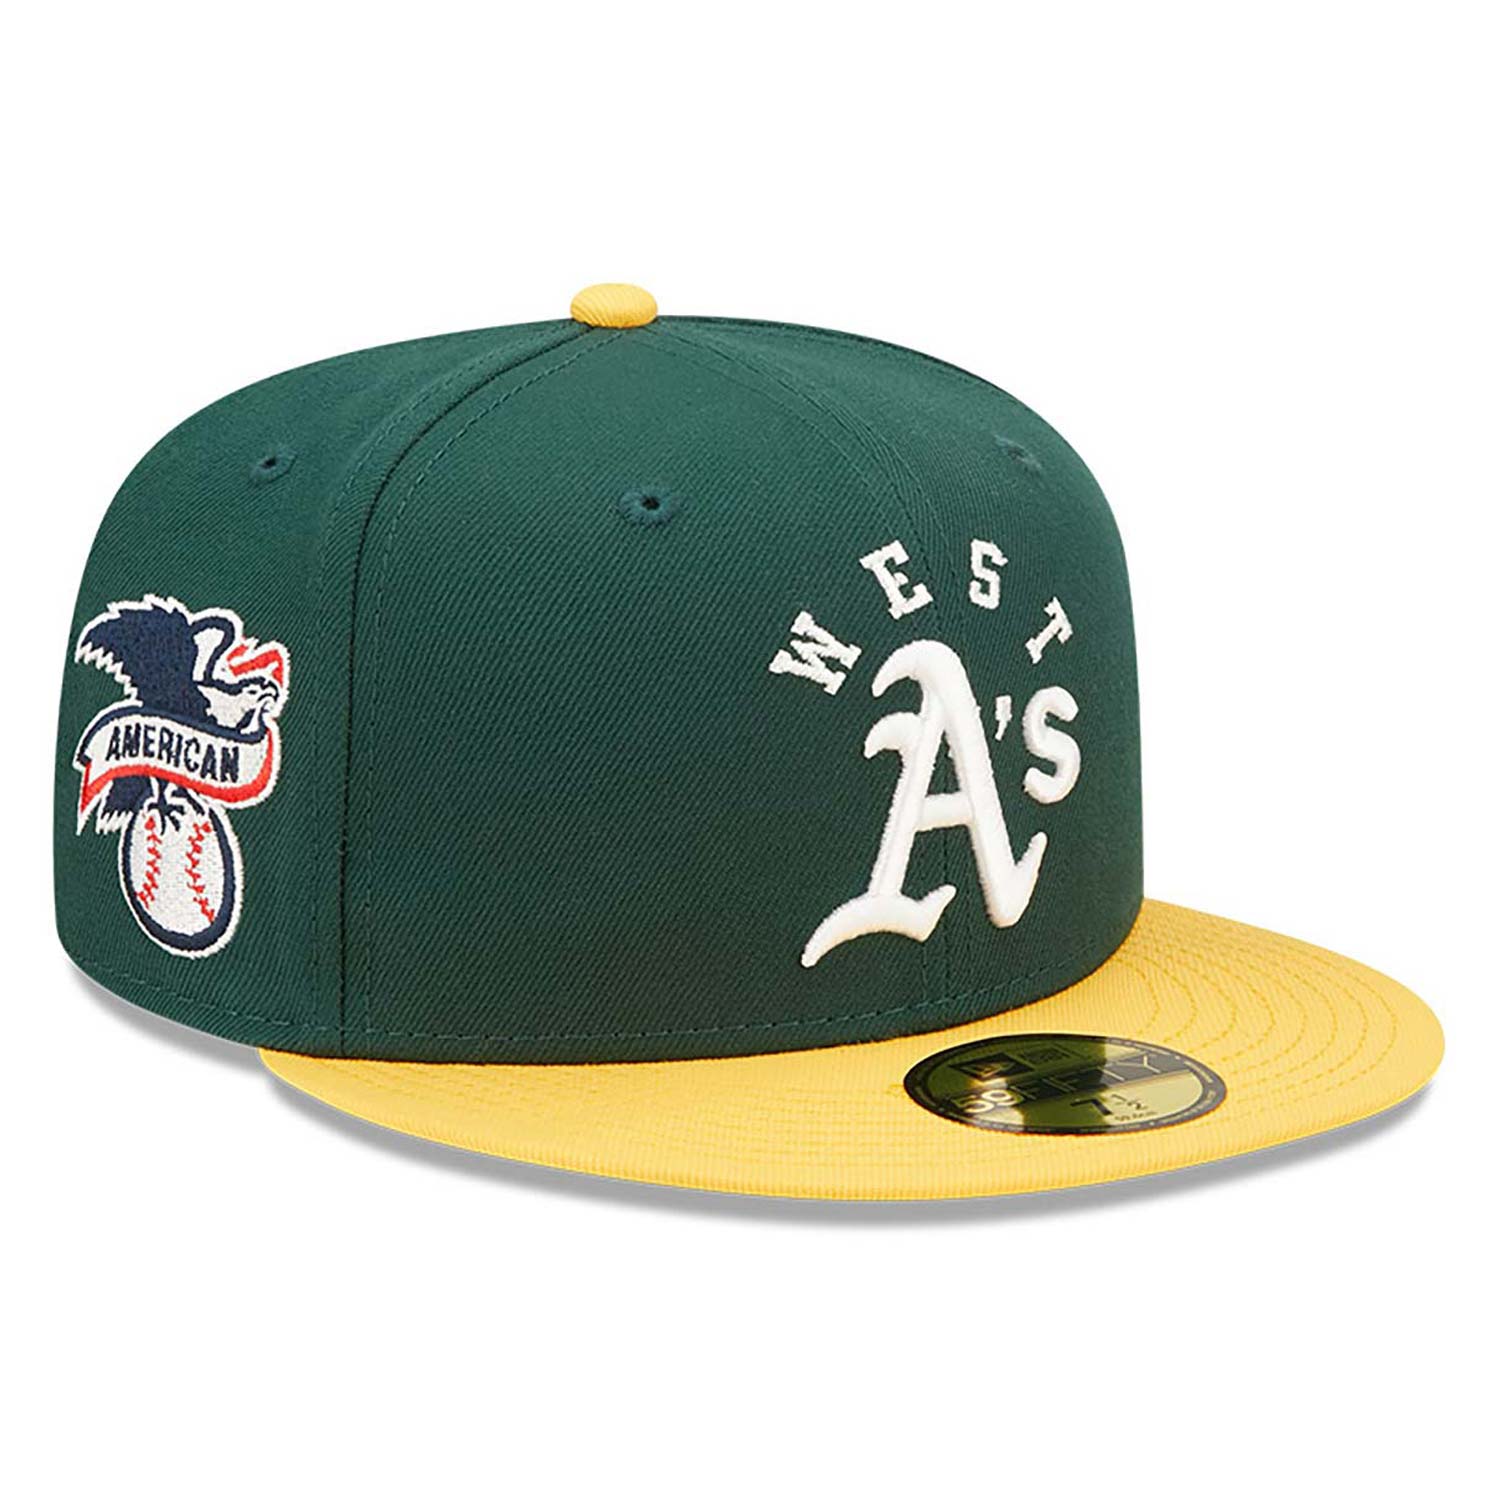 Oakland Athletics Team League Green 59FIFTY Fitted Cap